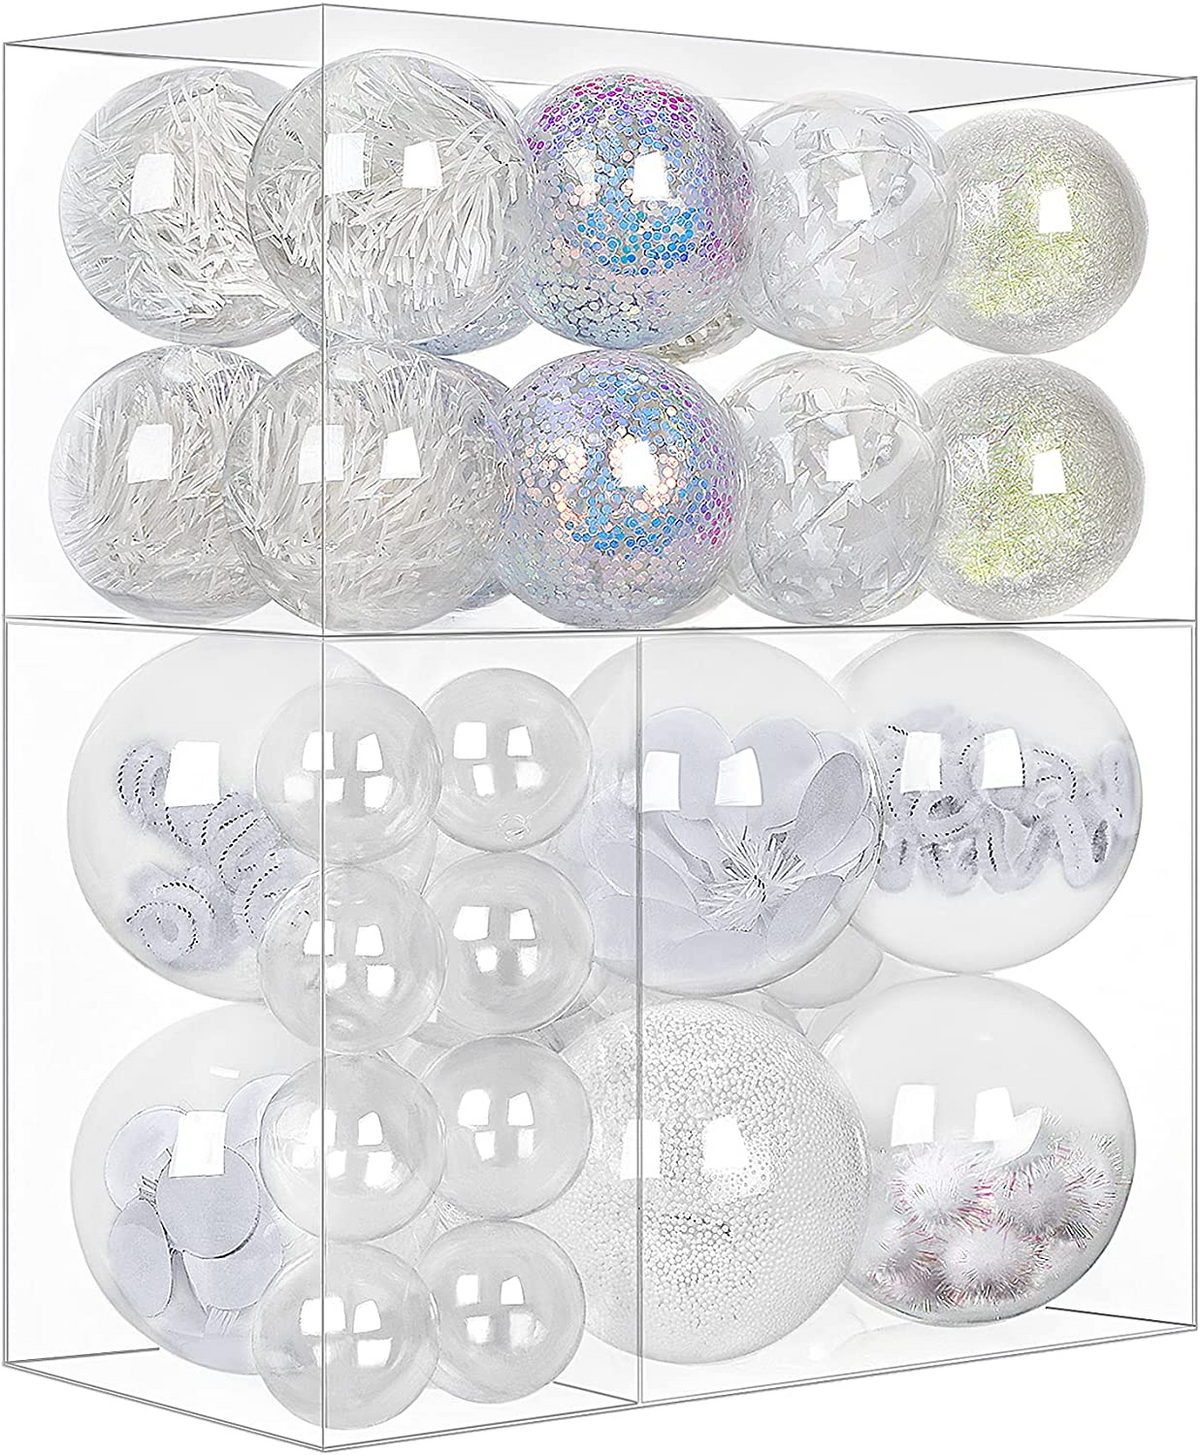 SHareconn 46pcs Christmas Balls Ornaments Set, Shatterproof Plastic Clear Decorative Baubles for Xmas Tree Decor Holiday Wedding Party Decoration with Hooks Included